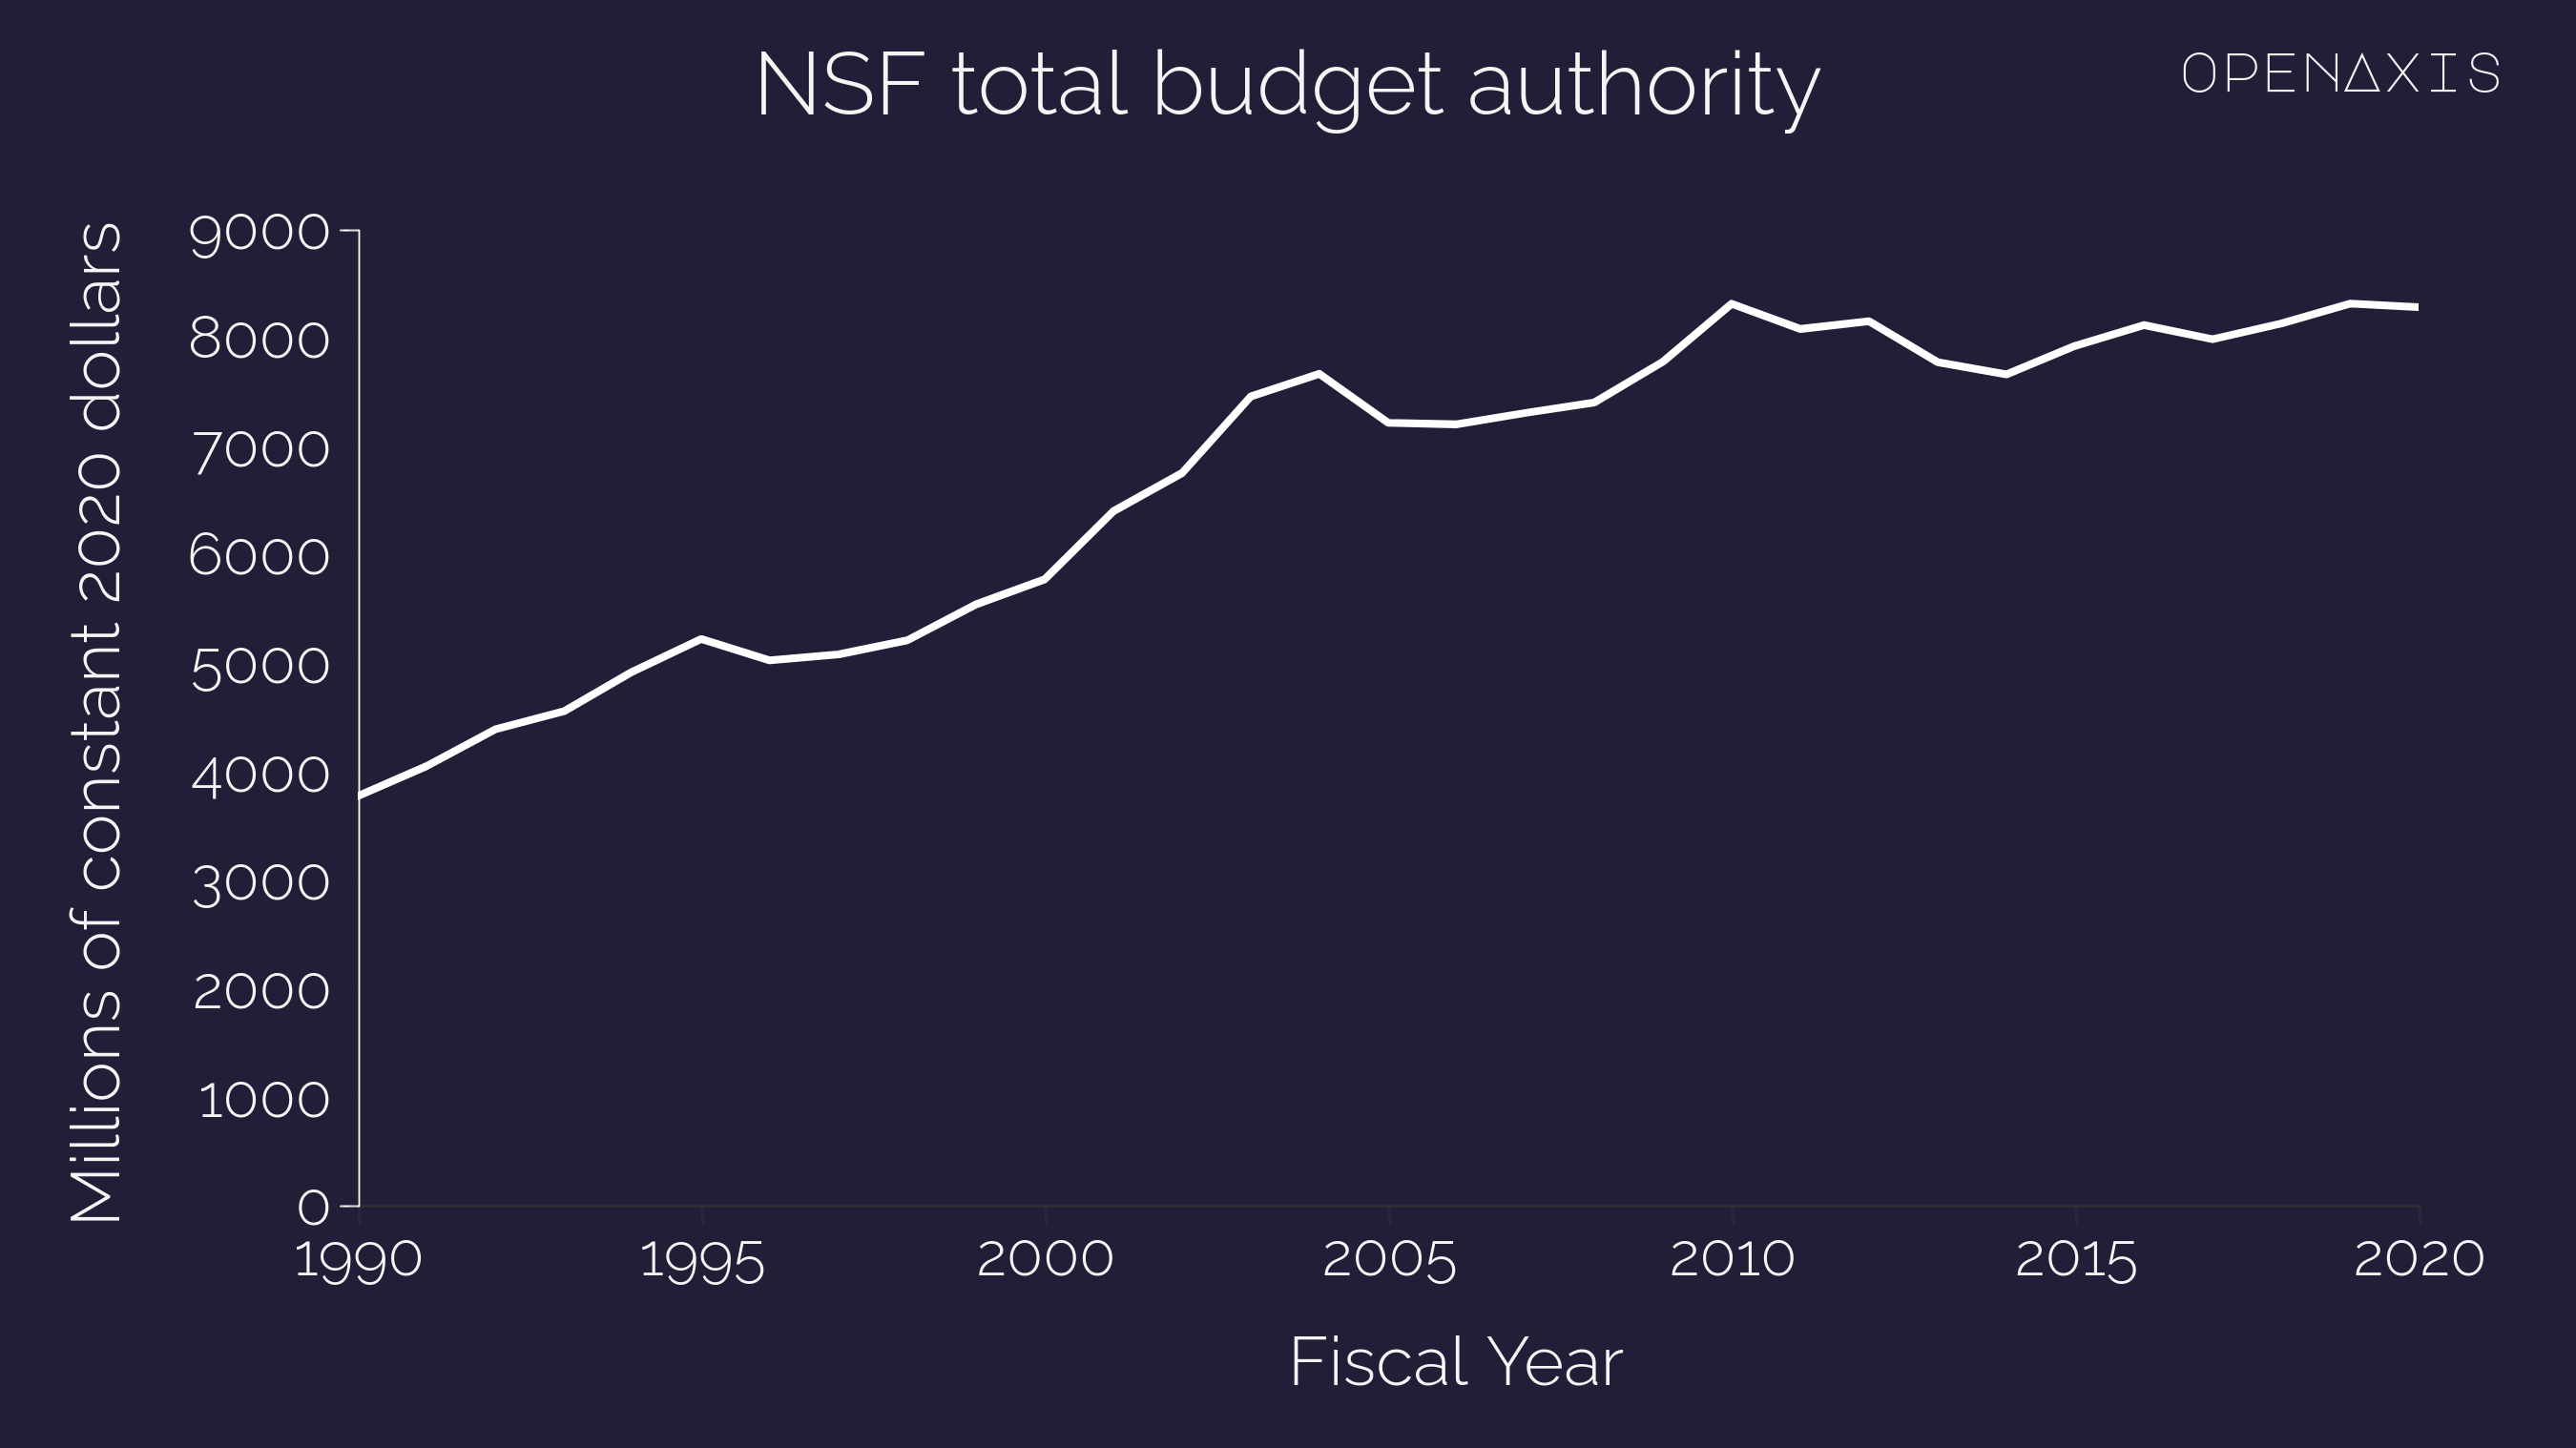 <p>NSF budget grew from $3.8B in 1990 to $8.3B in 2022 in constant 2020 dollars. The Endless Frontier act would have more than tripled this.</p><p>The COMPETES Act only authorizes a fraction of additional NSF spending for additional basic and advanced technology research. $18B vs the Endless Frontier's $110B. </p><p><br /></p><p>Data for visualization: <a href="https://www.aaas.org/programs/r-d-budget-and-policy/historical-trends-federal-rd" target="_blank">American Association for the Advancement of Science</a></p><p><br /></p><p>﻿<a href="/search?q=%23economy" target="_self">#economy</a>﻿ ﻿<a href="/search?q=%23nsf" target="_self">#nsf</a>﻿ </p><p><br /></p>